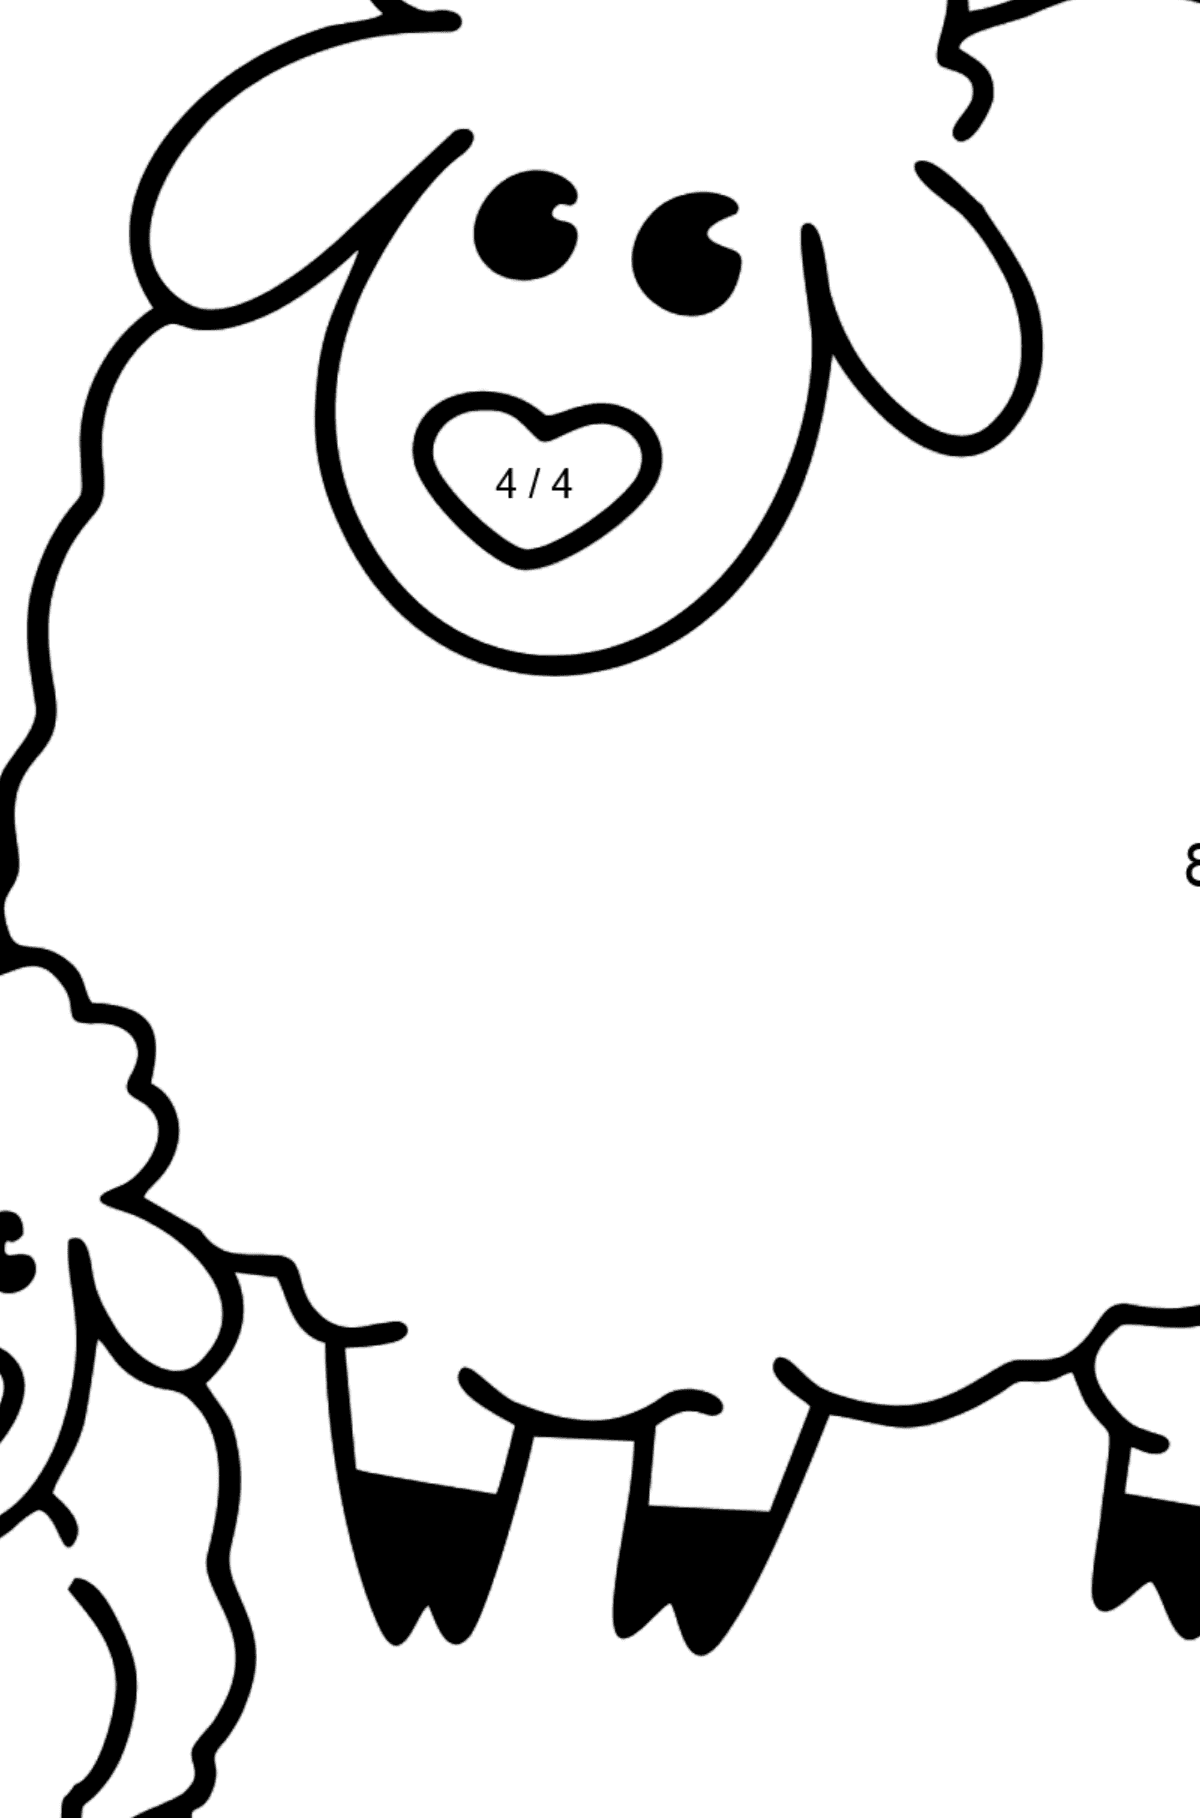 Sheep with Lamb coloring page - Math Coloring - Division for Kids